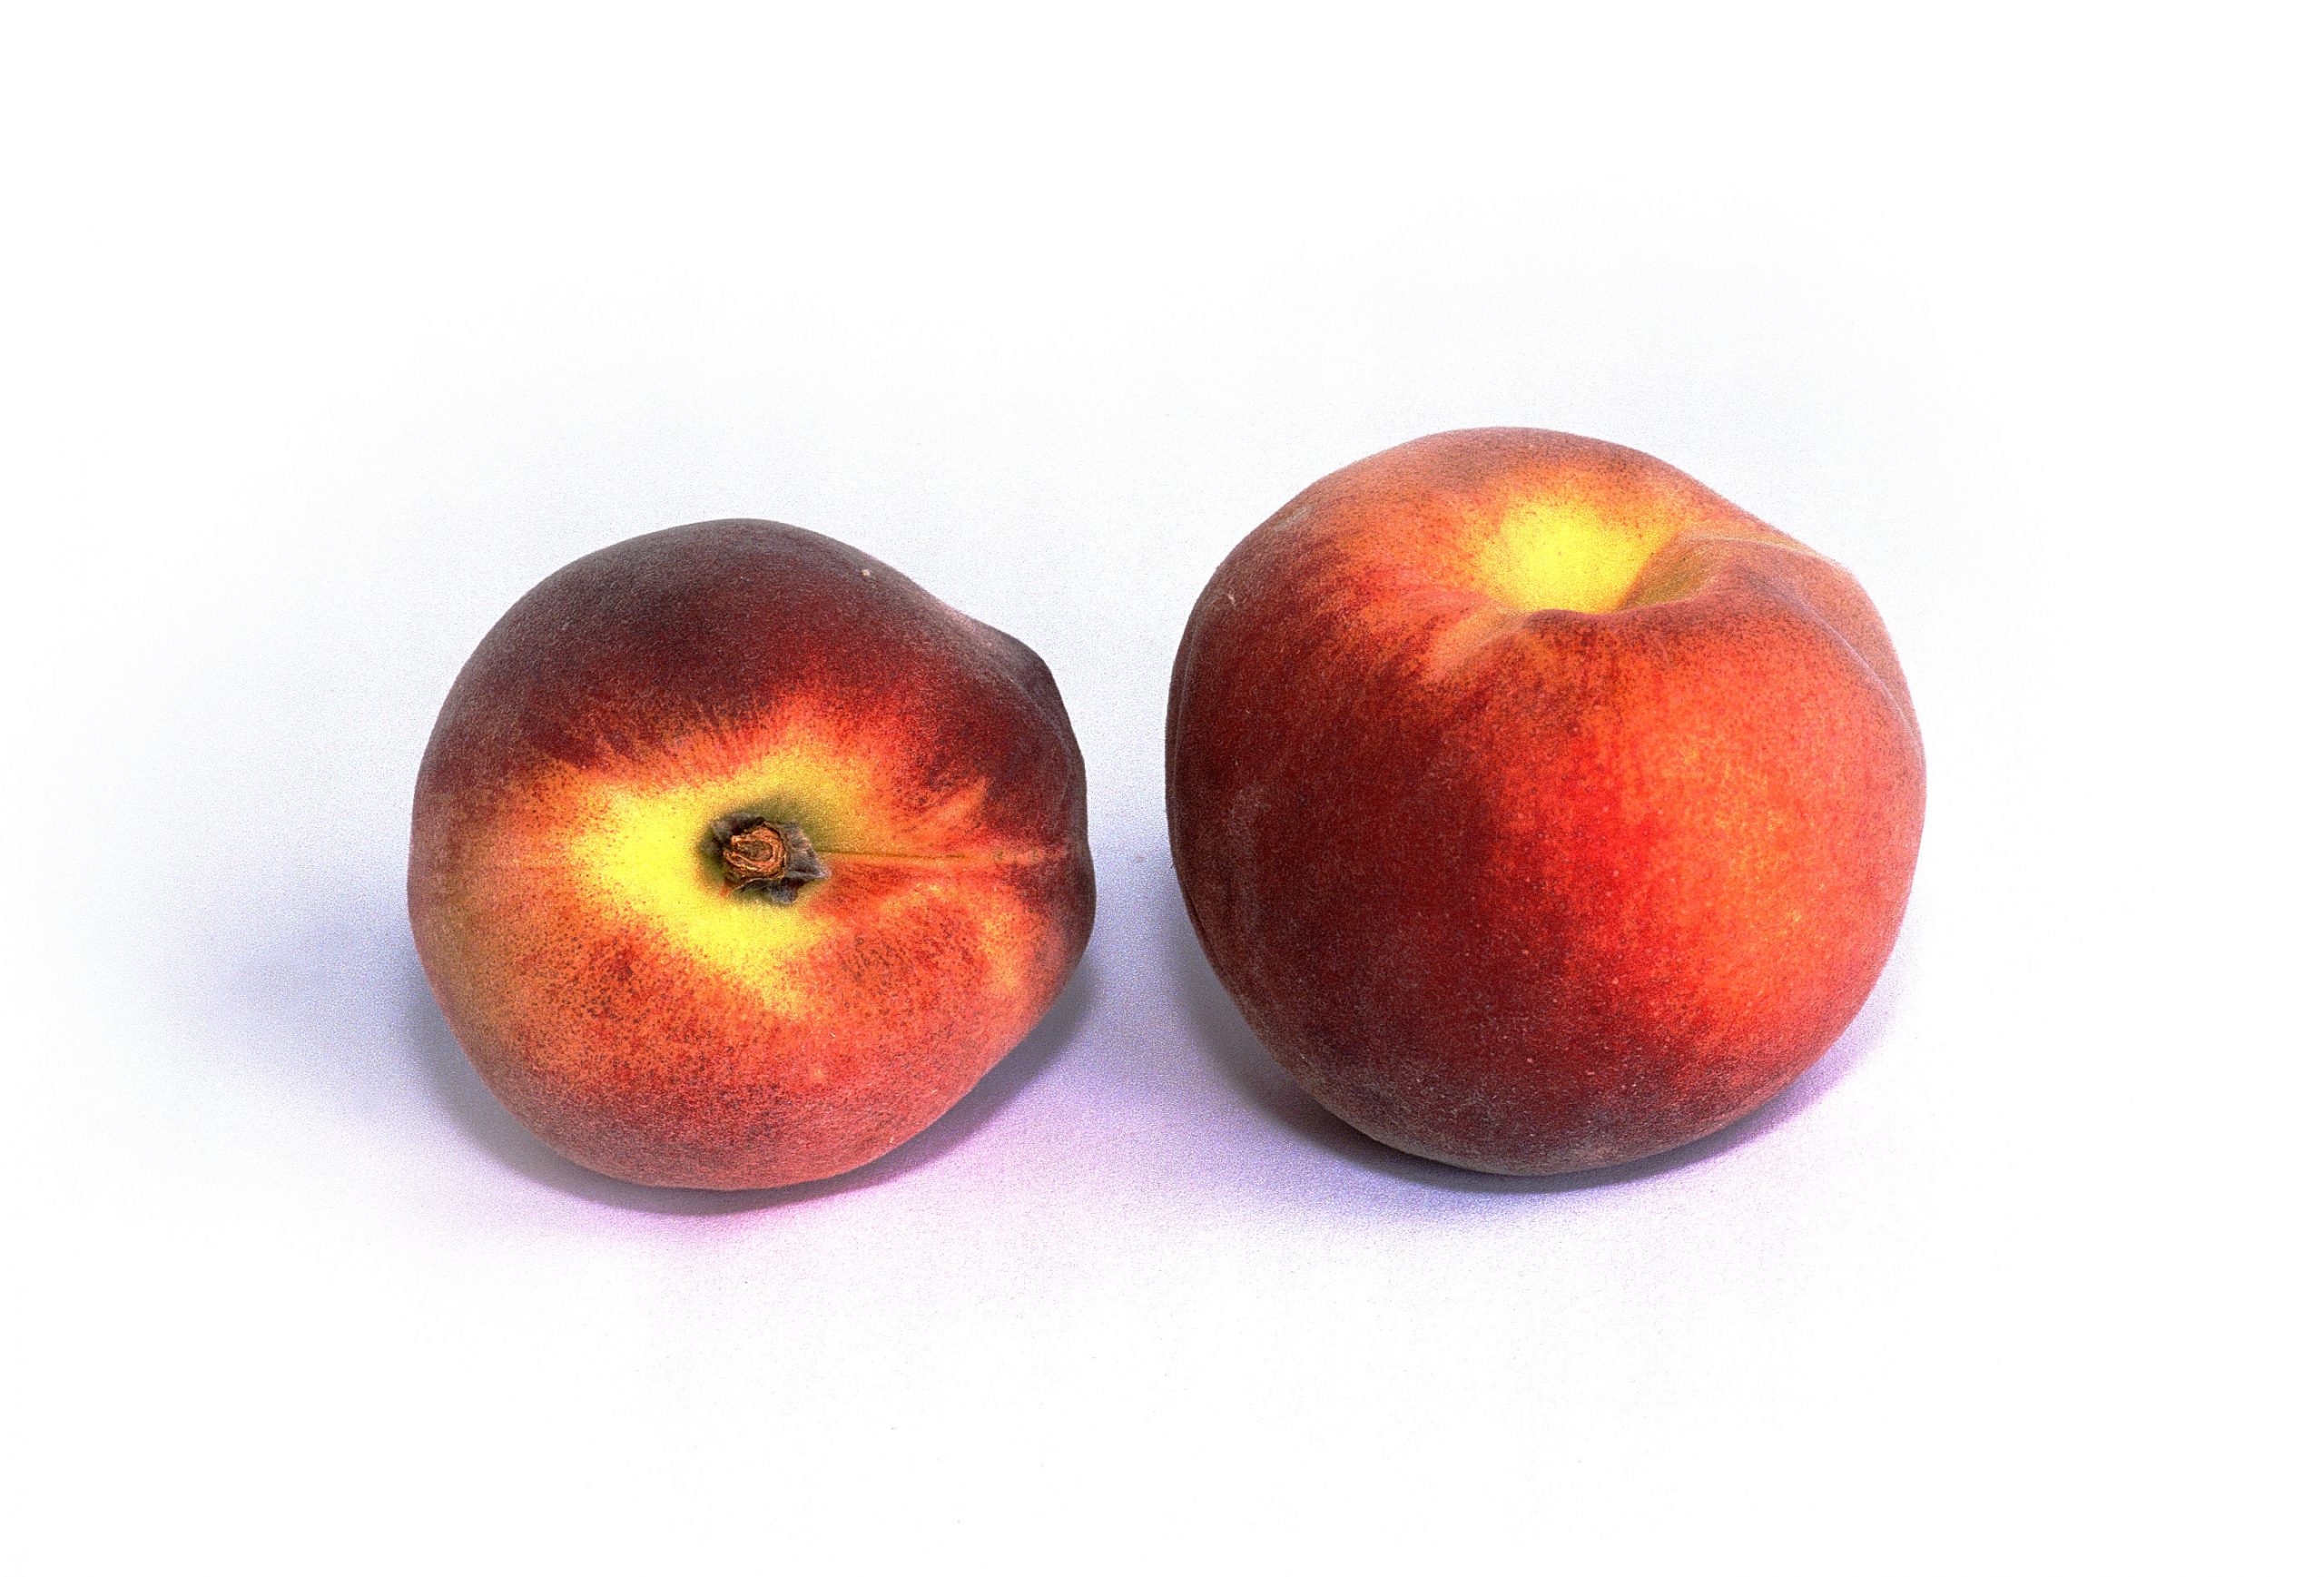 Italy is also major peach and nectarine exporter, mainly within the EU-28. In 2014, it exported 298,442 tons of peaches and nectarines, 19% less than 2013.